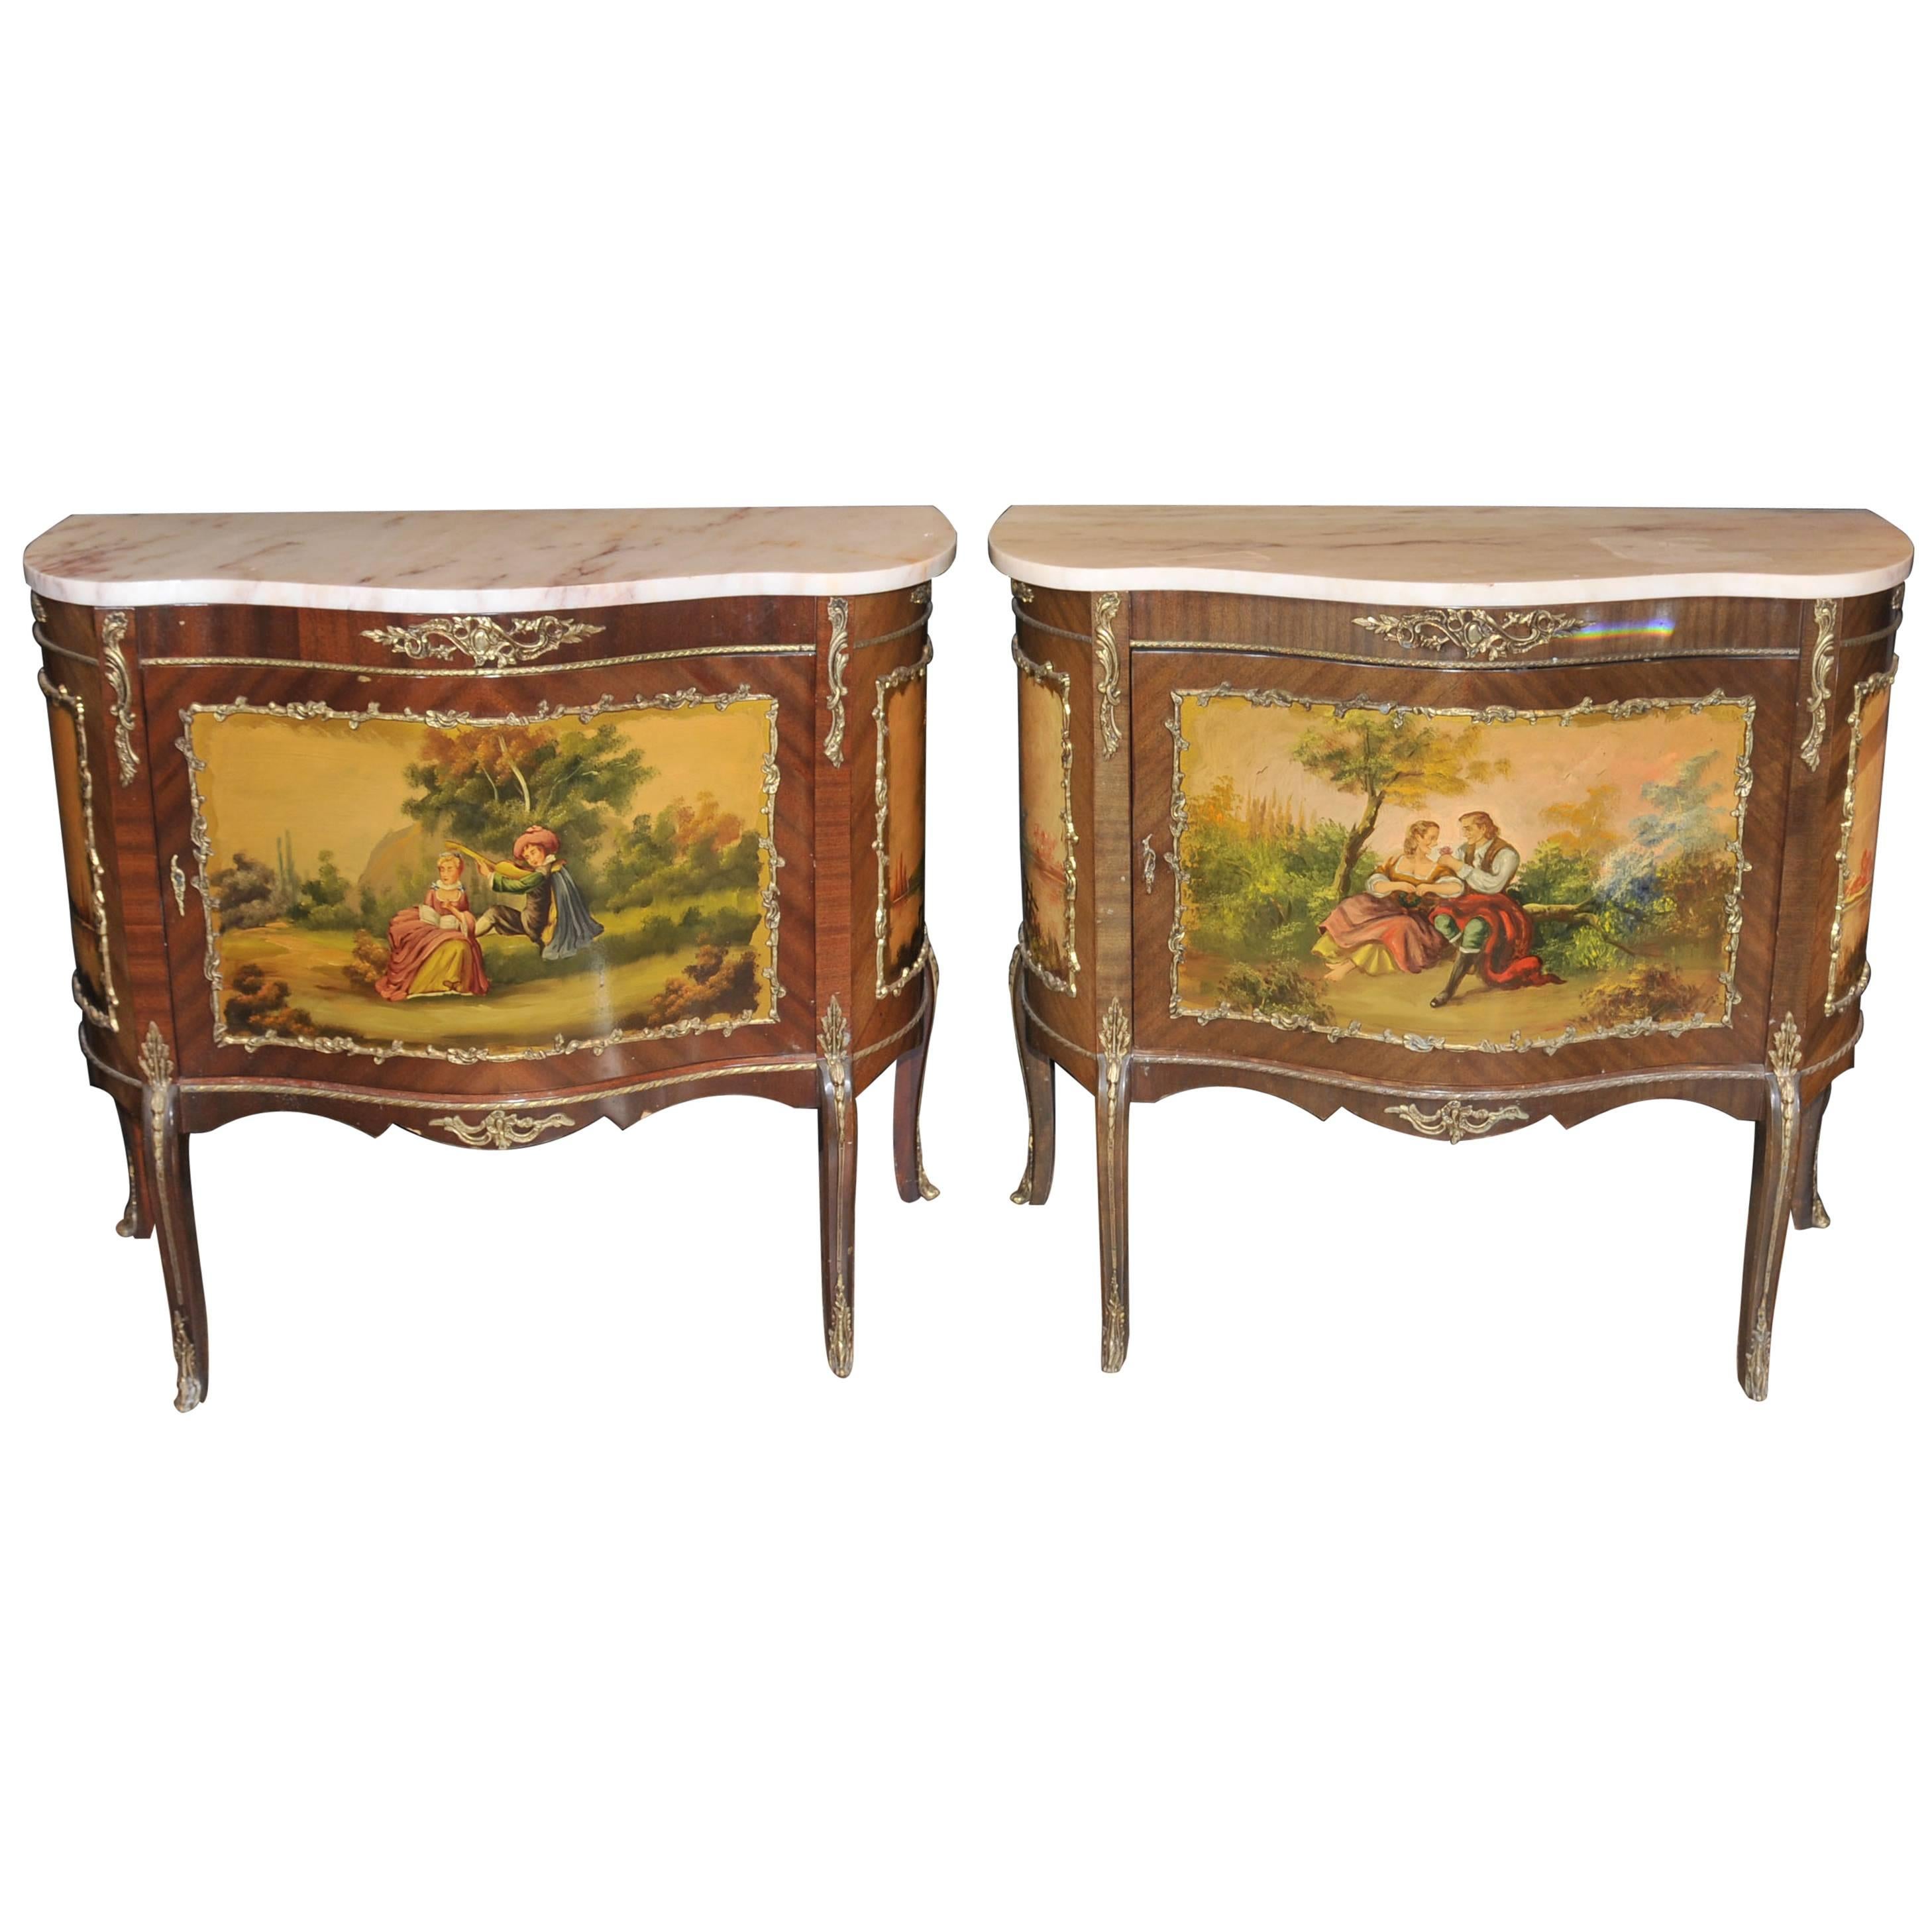 Pair of French Vernis Martin Style Painted Chests Cabinets Lacquer Commodes For Sale